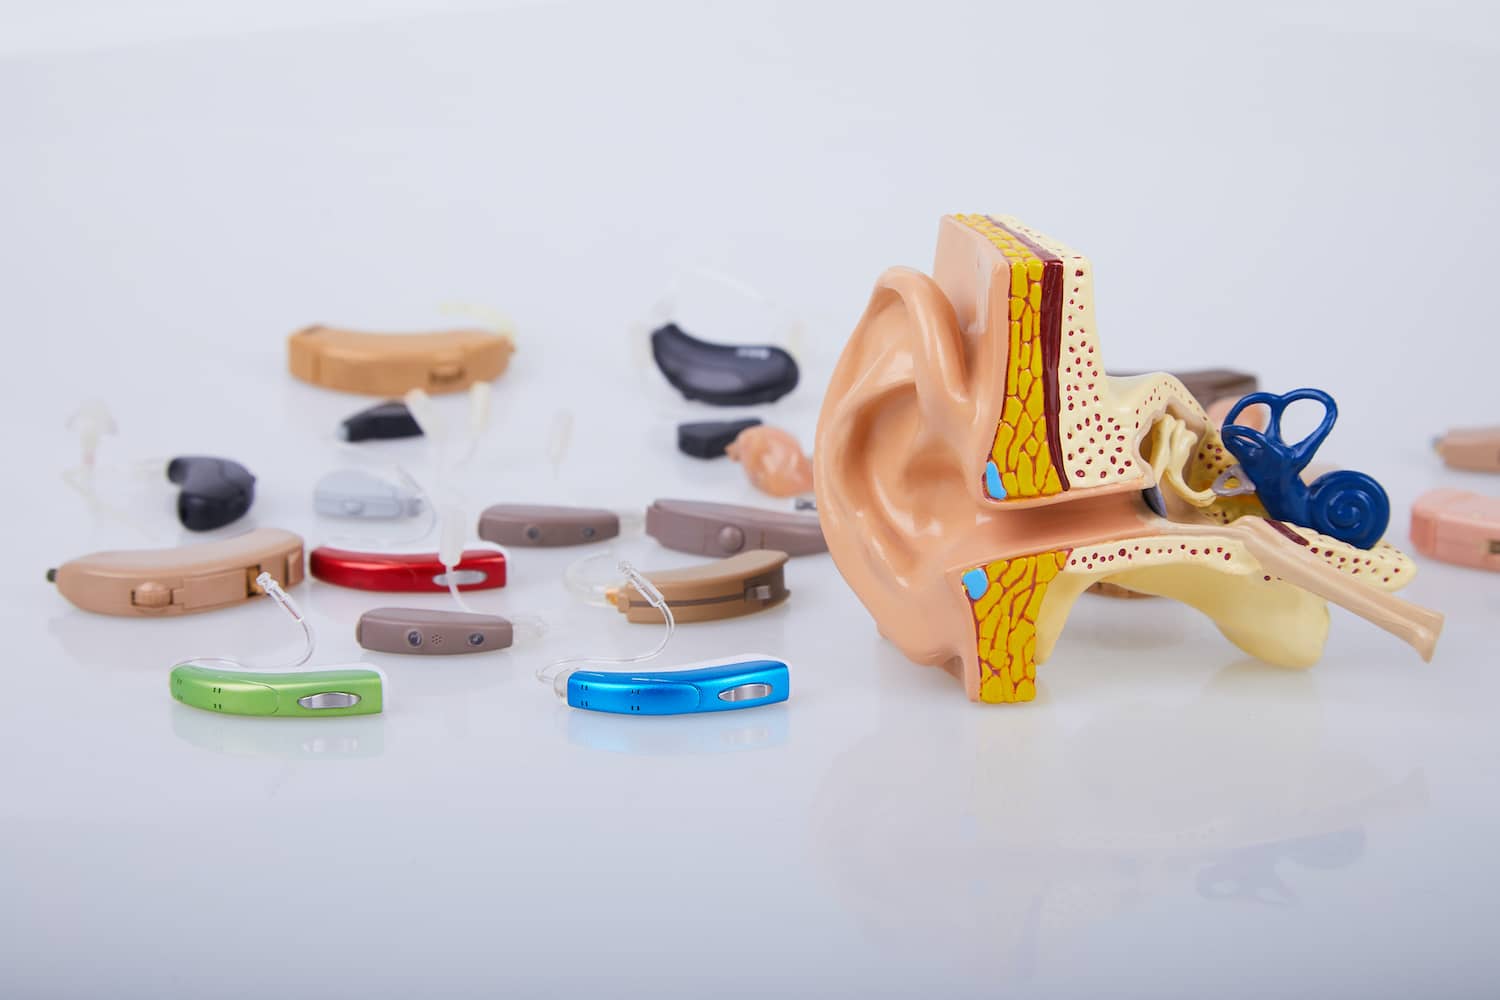 FDA Wants to make Hearing Aids more Accessible & Affordable